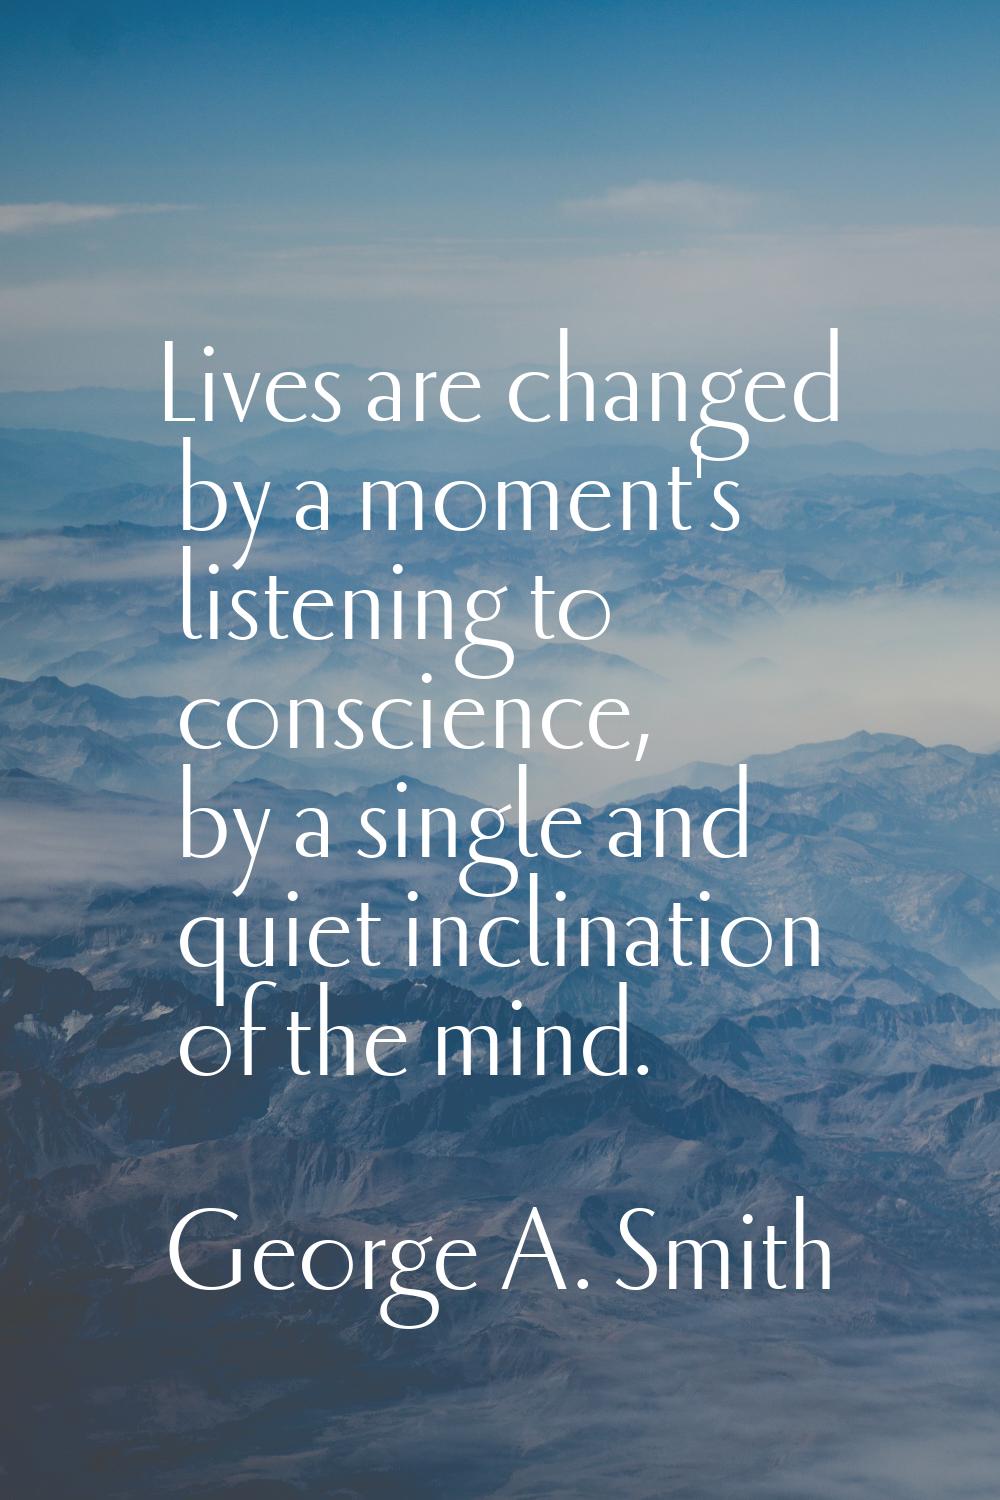 Lives are changed by a moment's listening to conscience, by a single and quiet inclination of the m